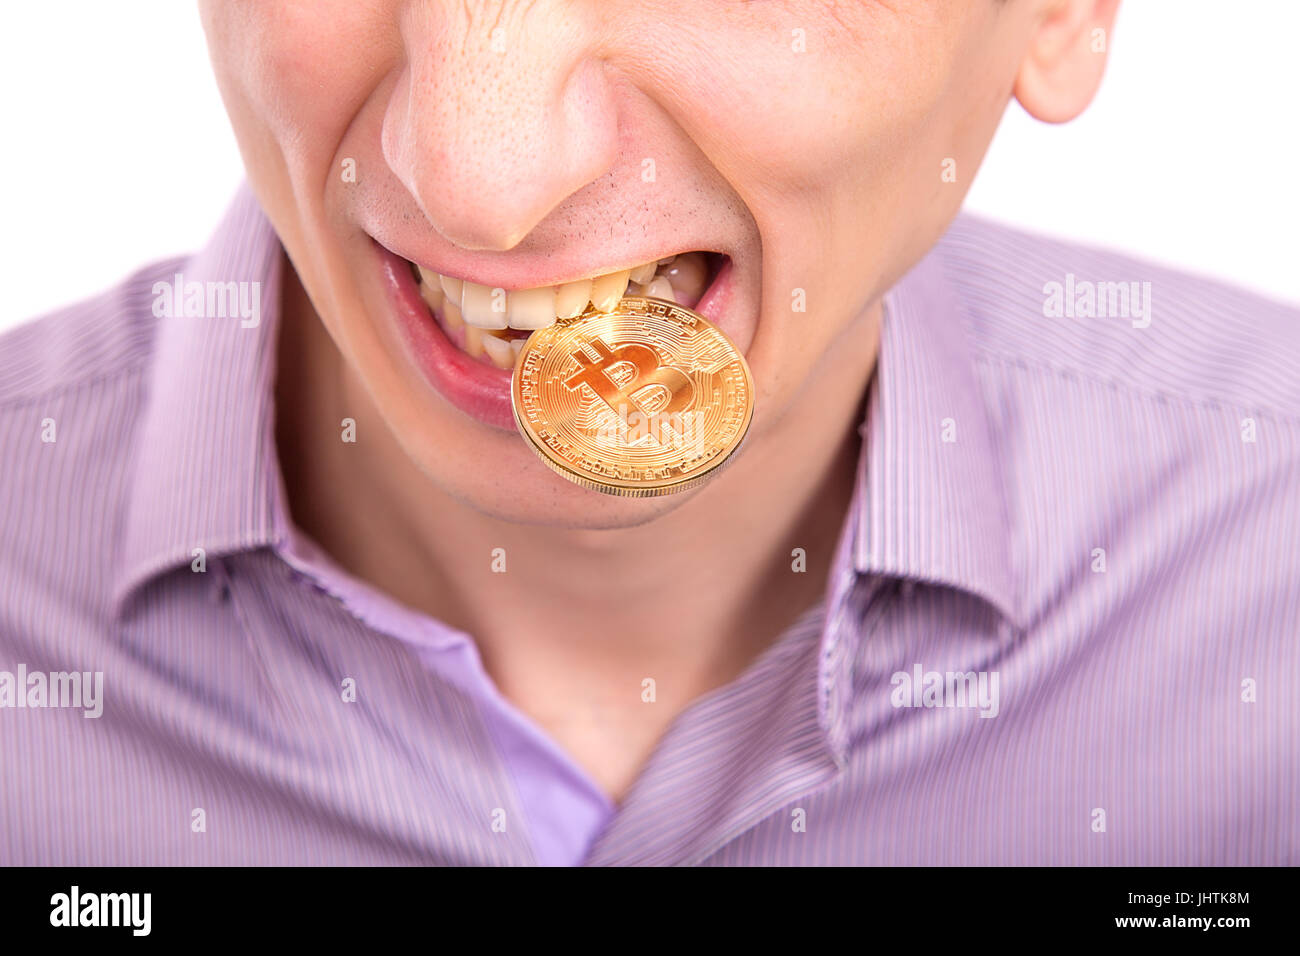 man with one gold bitcoin coin on a tooth isolated on white background Stock Photo